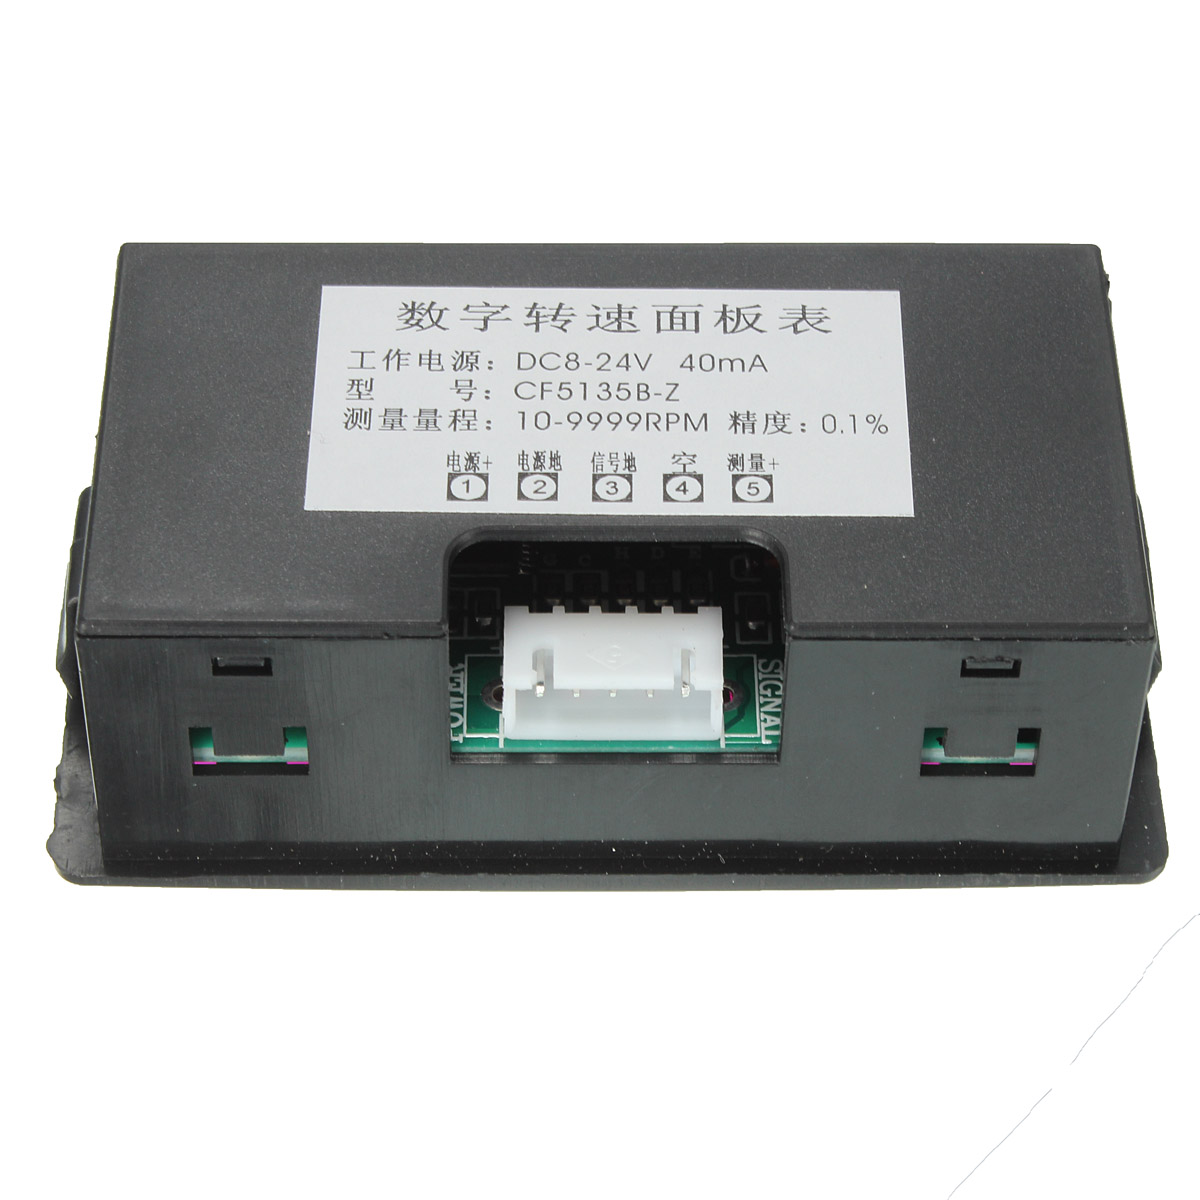 Red-LED-Tachometer-RPM-Speed-Meter-with-Proximity-Switch-Sensor-NPN-928692